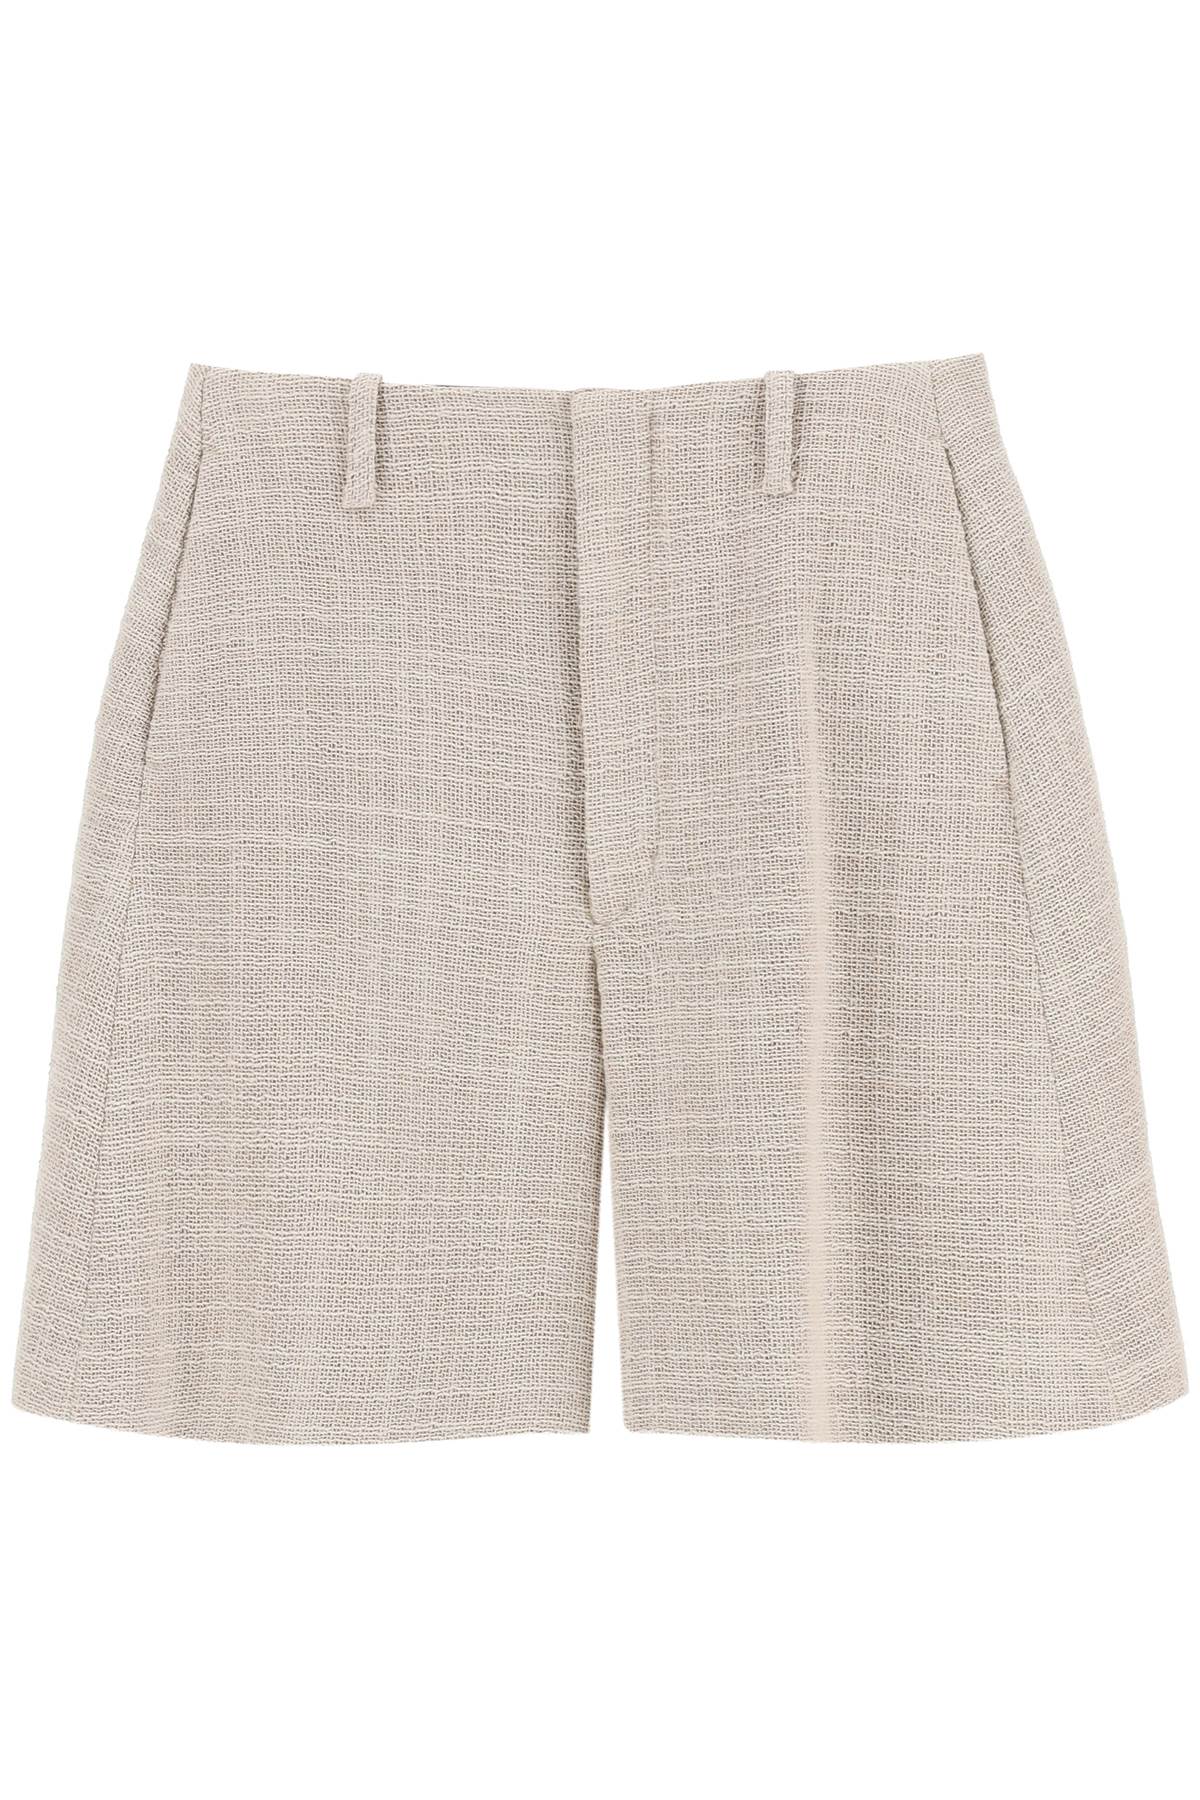 BY MALENE BIRGER PACCAS COTTON SHORTS